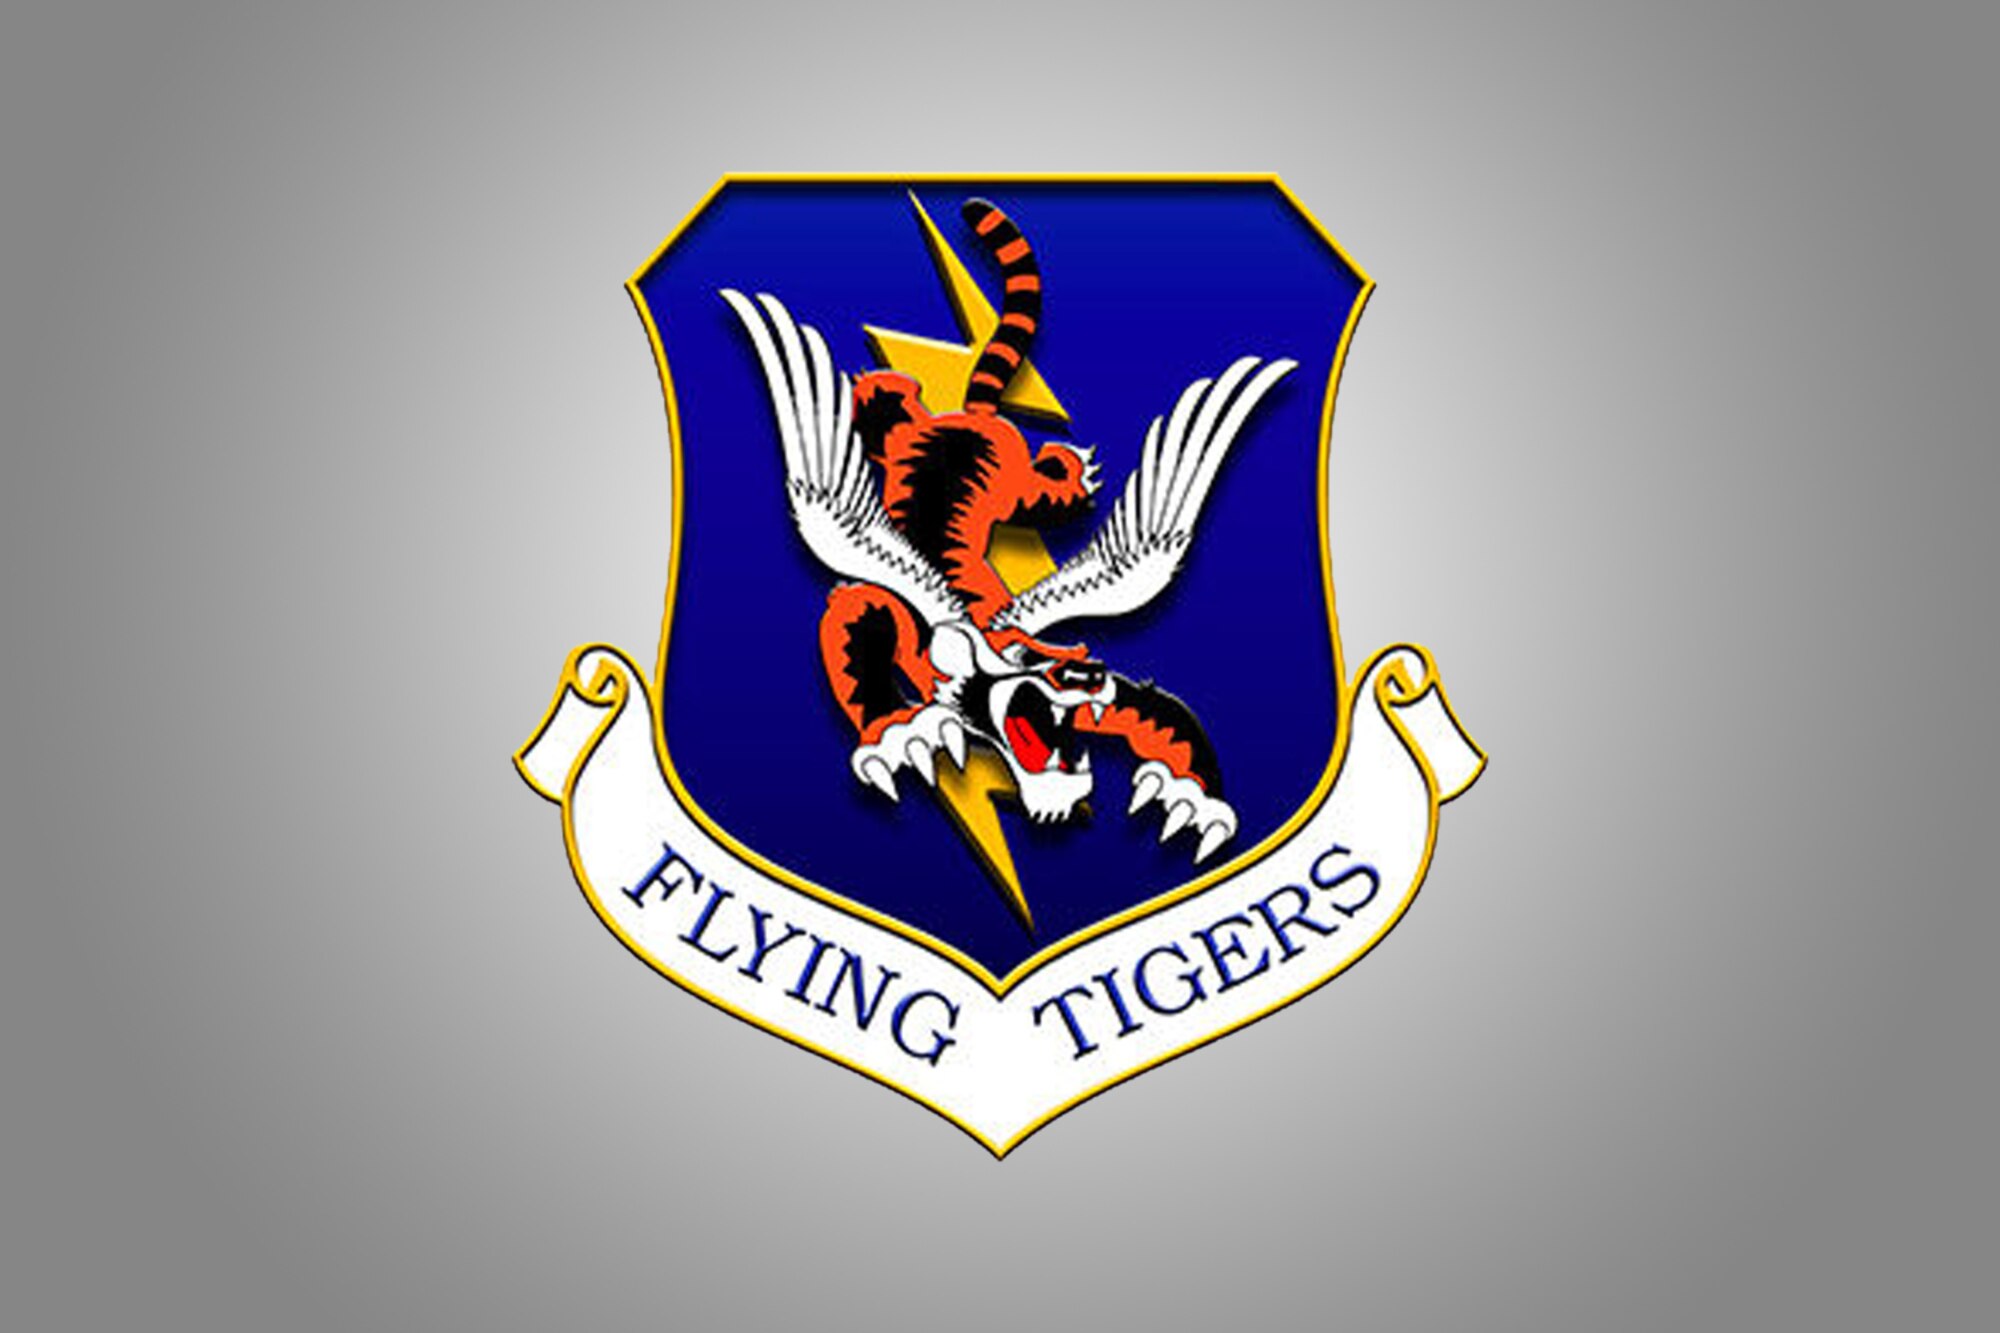 Graphic of Flying Tigers shield